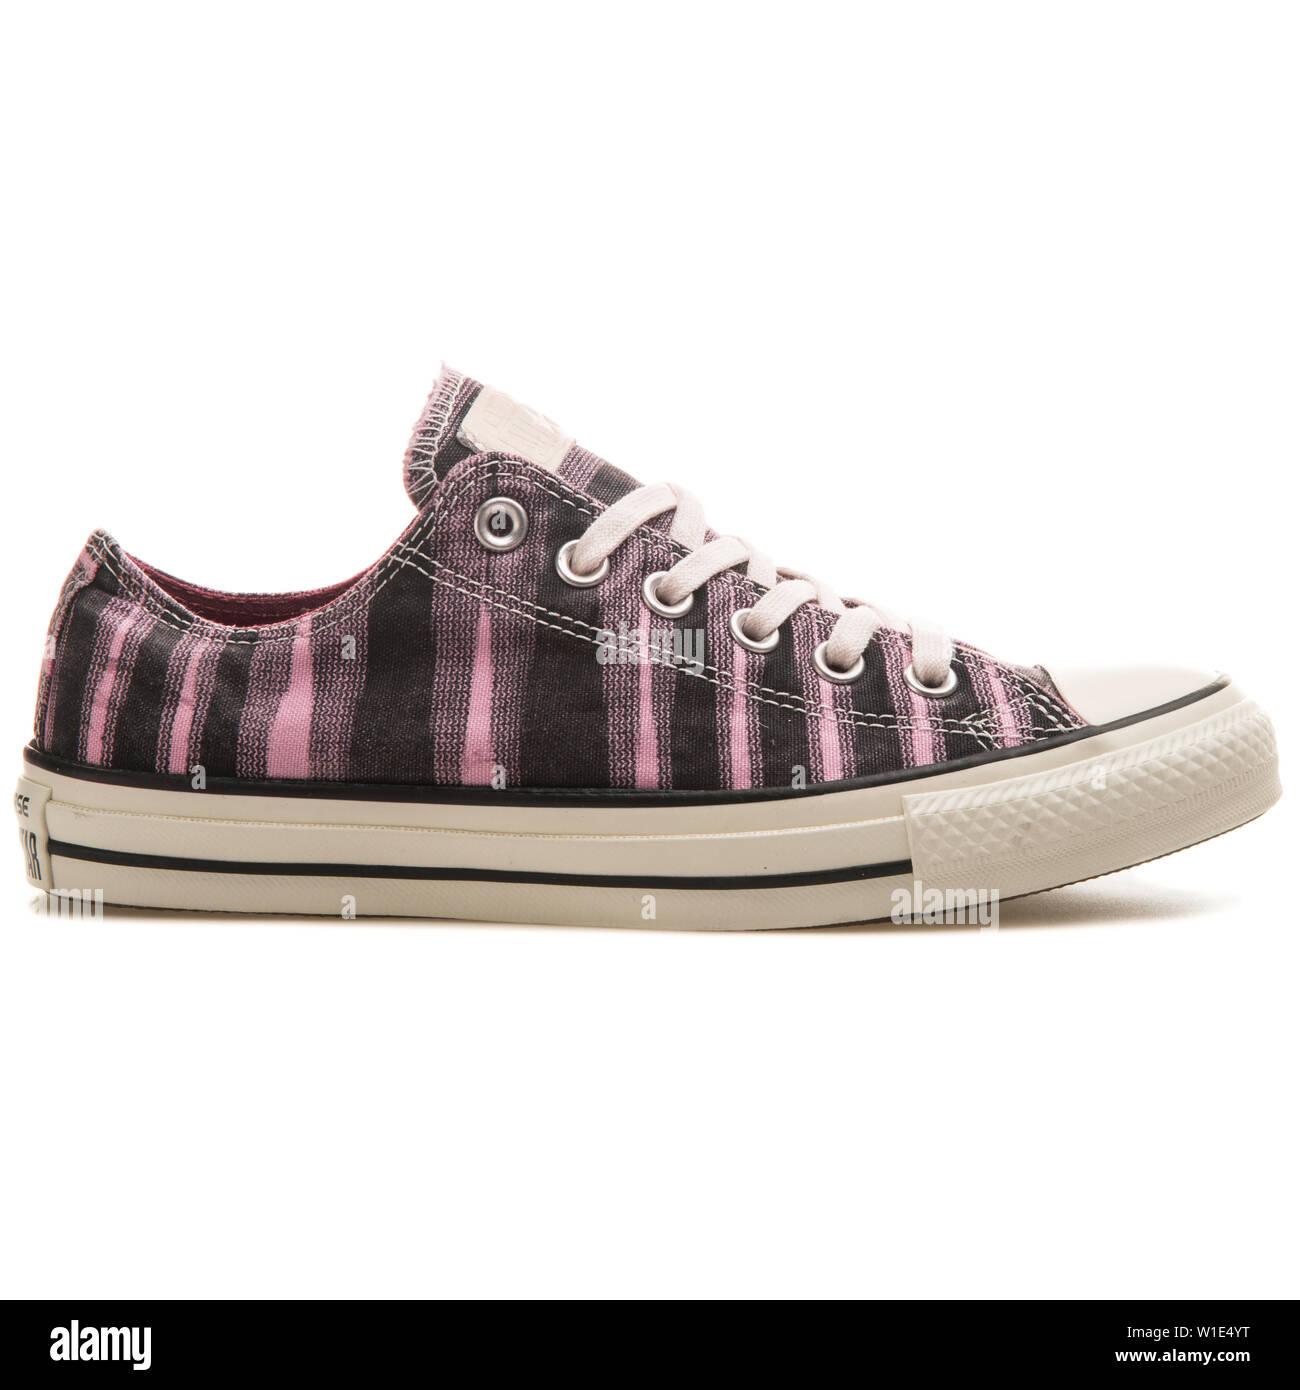 VIENNA, AUSTRIA - AUGUST 25, 2017: Converse Chuck Taylor Missoni OX pink  and black sneaker on white background Stock Photo - Alamy